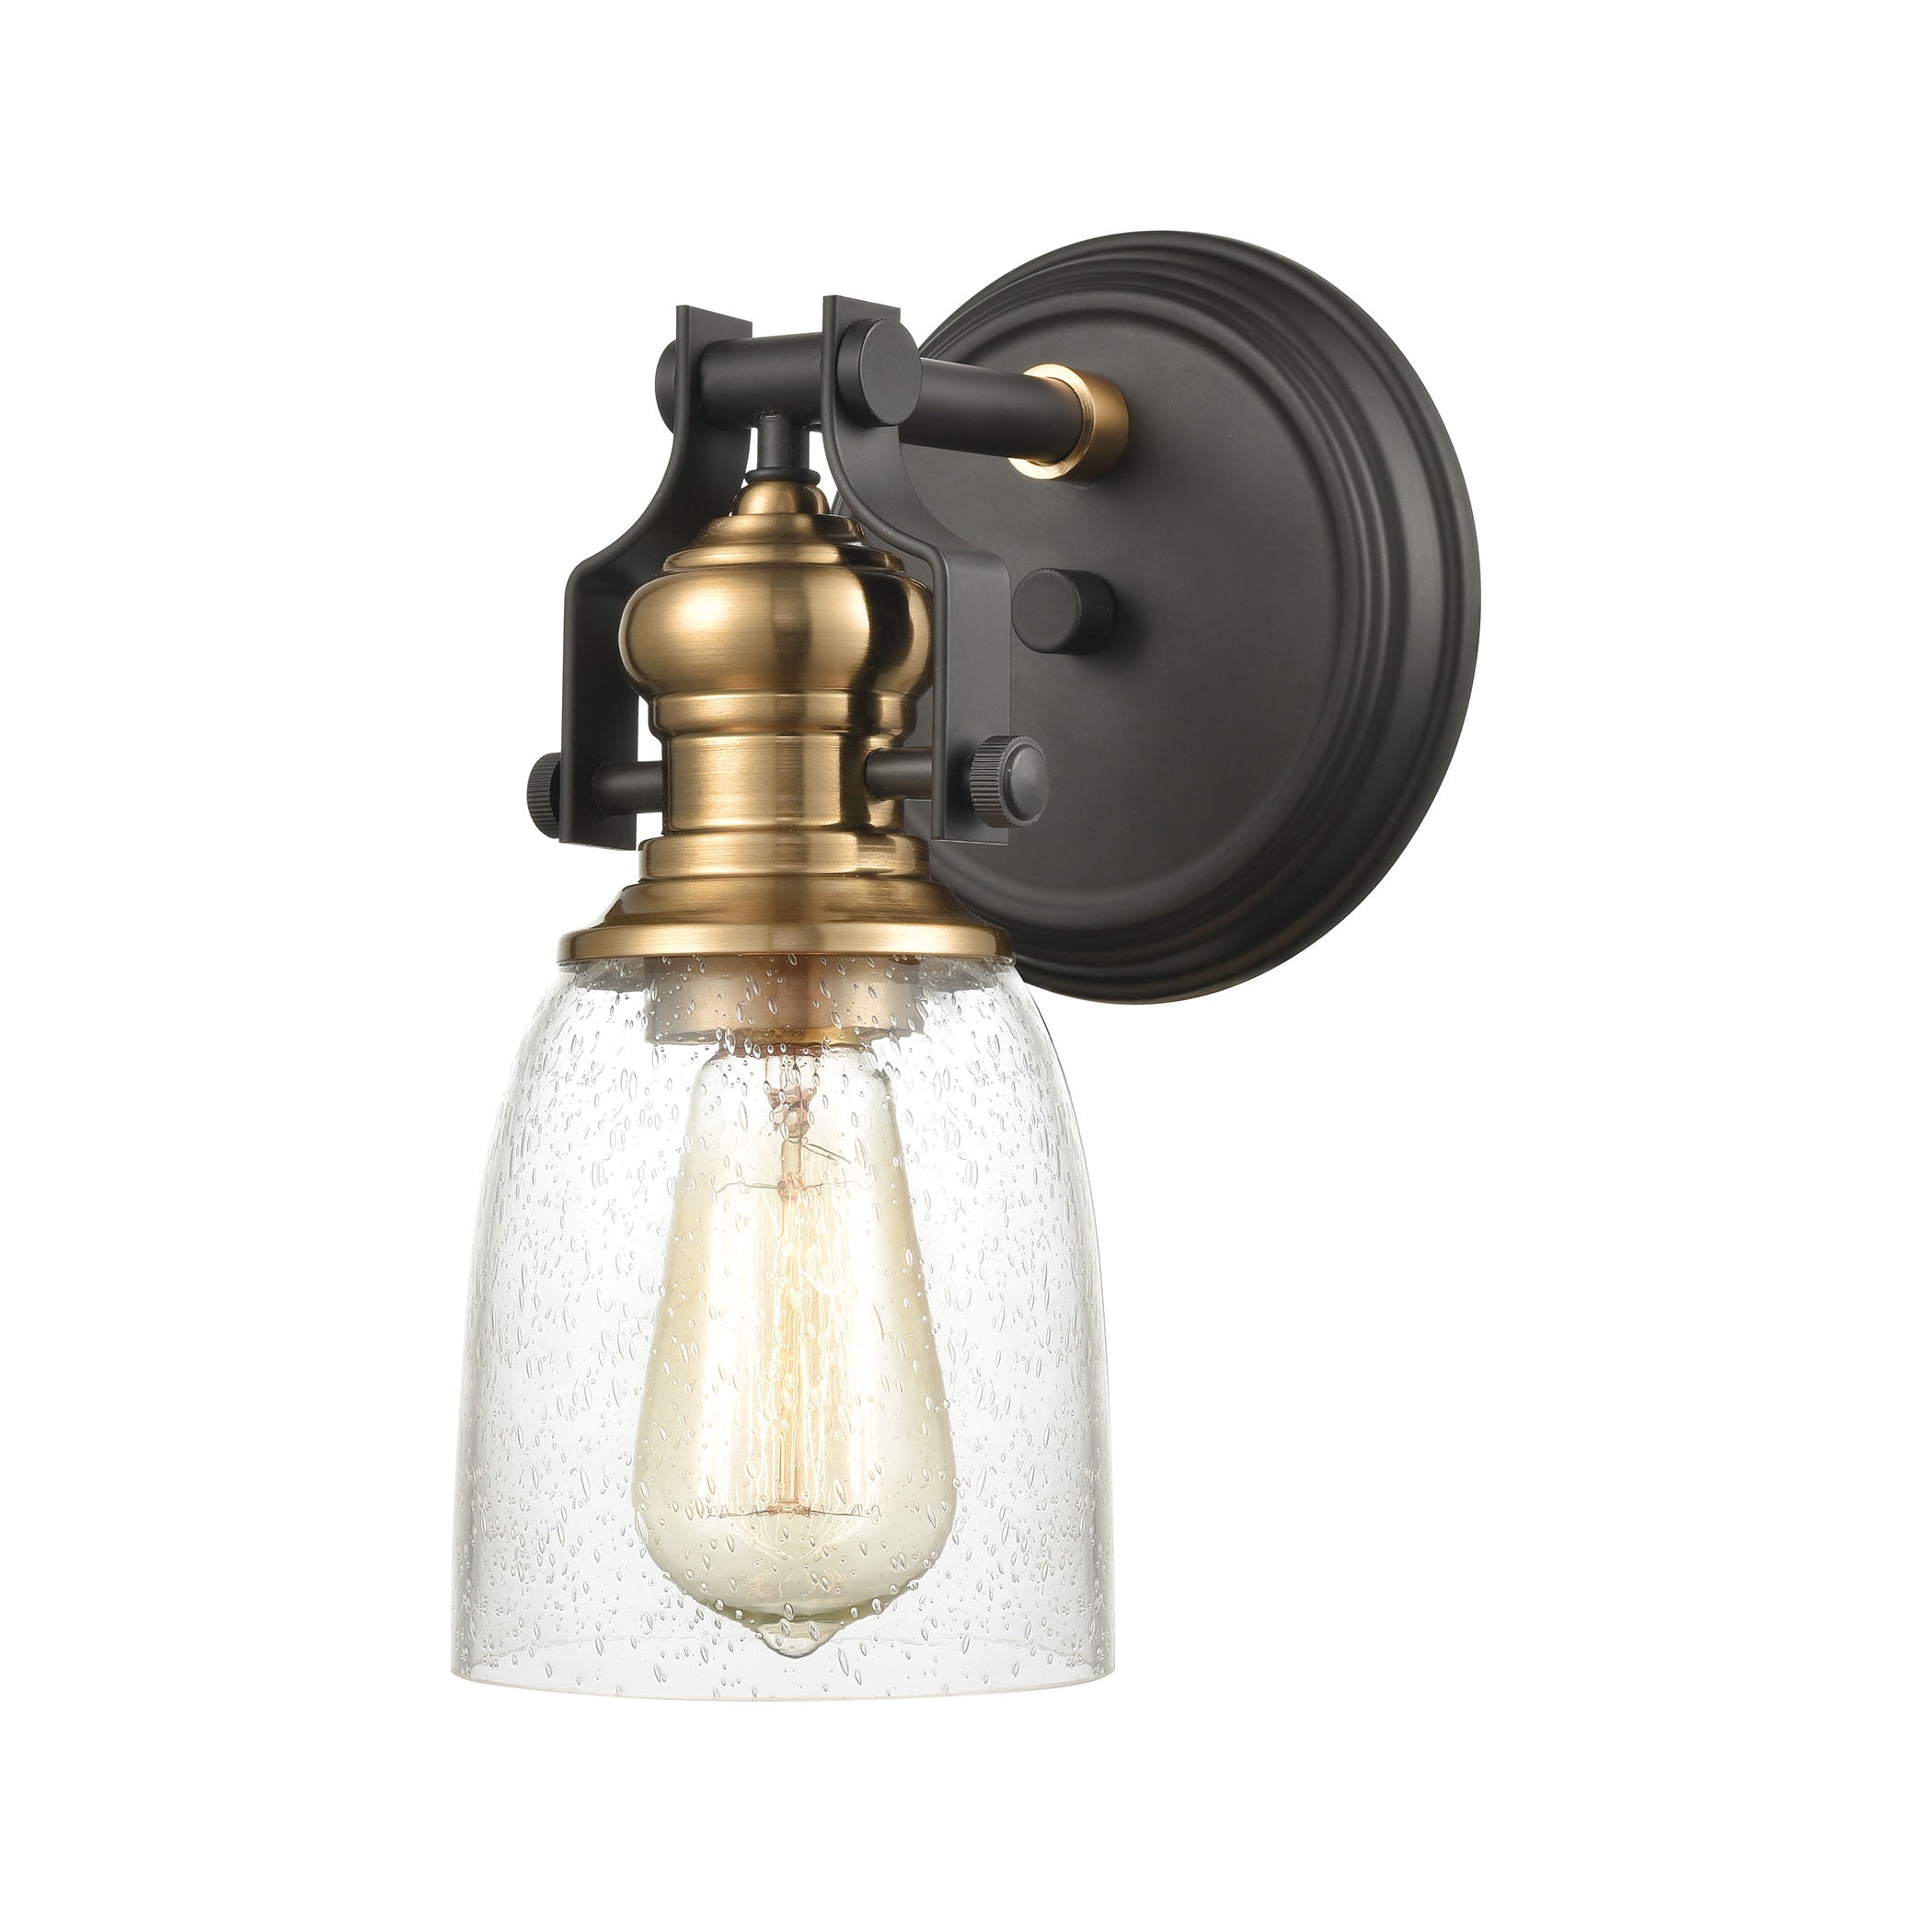 ELK Lighting 66684-1 Chadwick 4-Light Vanity Light in Oil Rubbed Bronze and Satin Brass with Seedy Glass